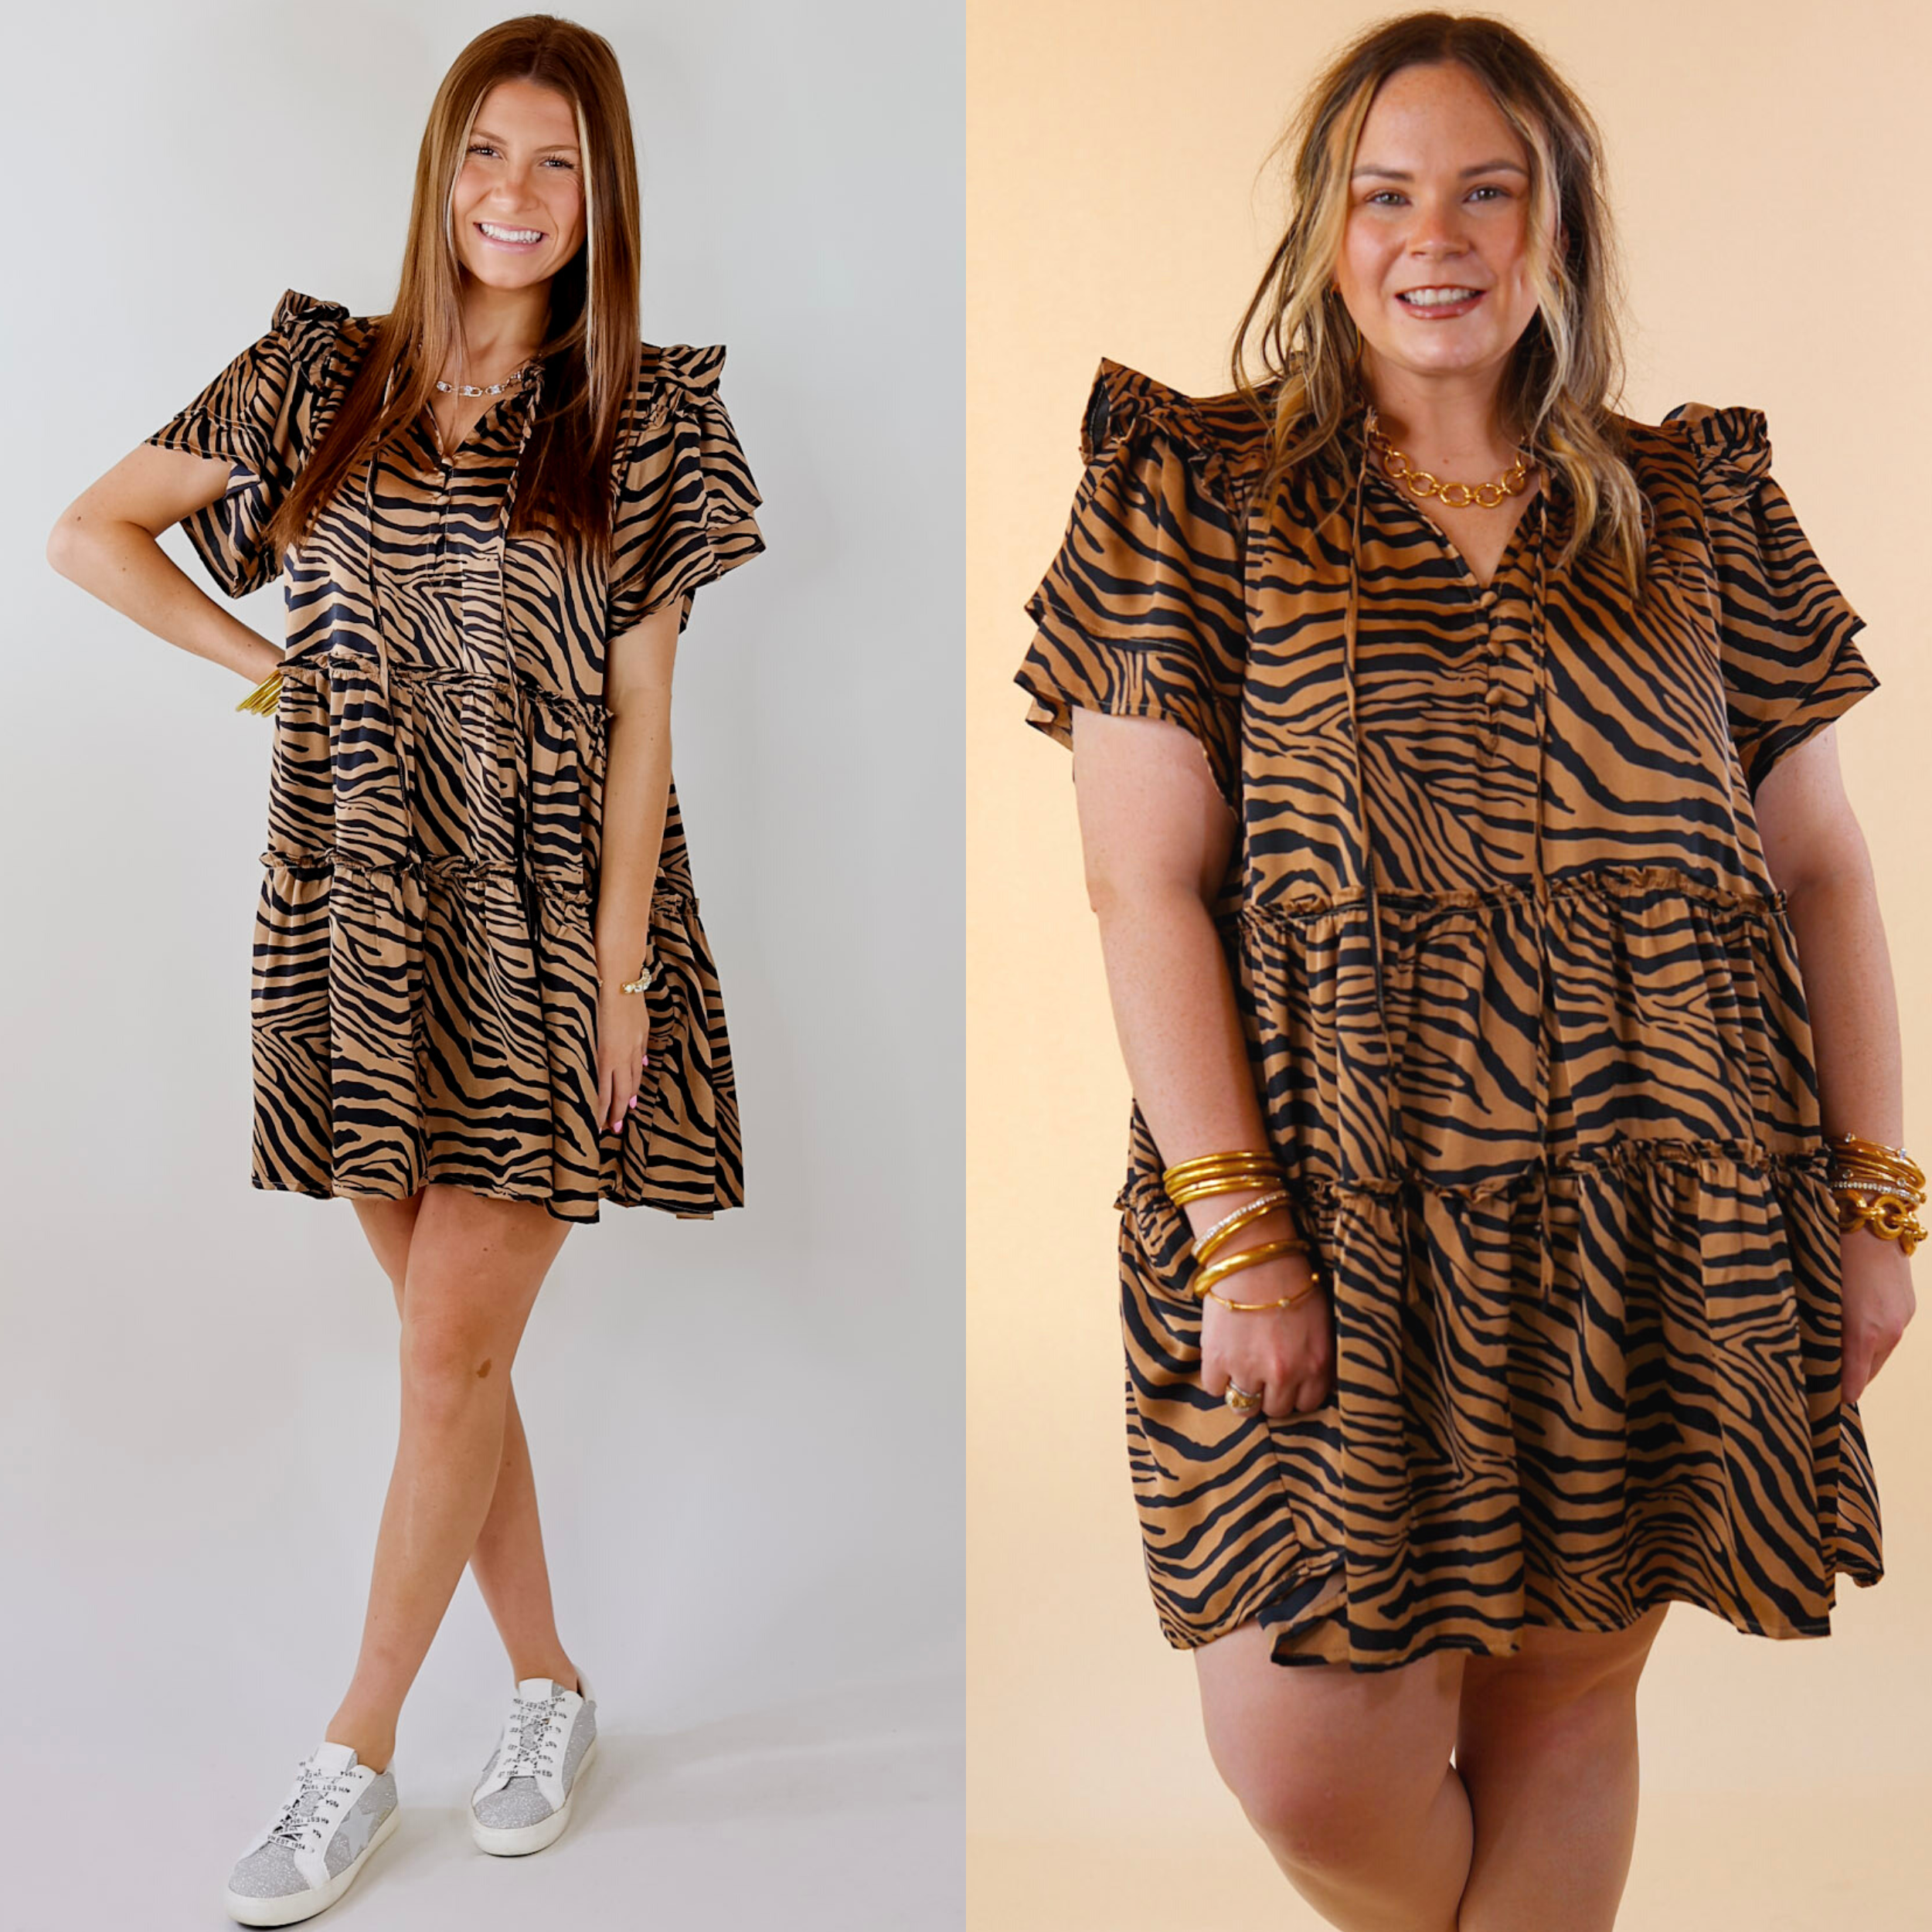 Model is wearing a thigh length mocha brown dress with black zebra print. Model has paired the dress with silver and white sneakers and gold jewelry.